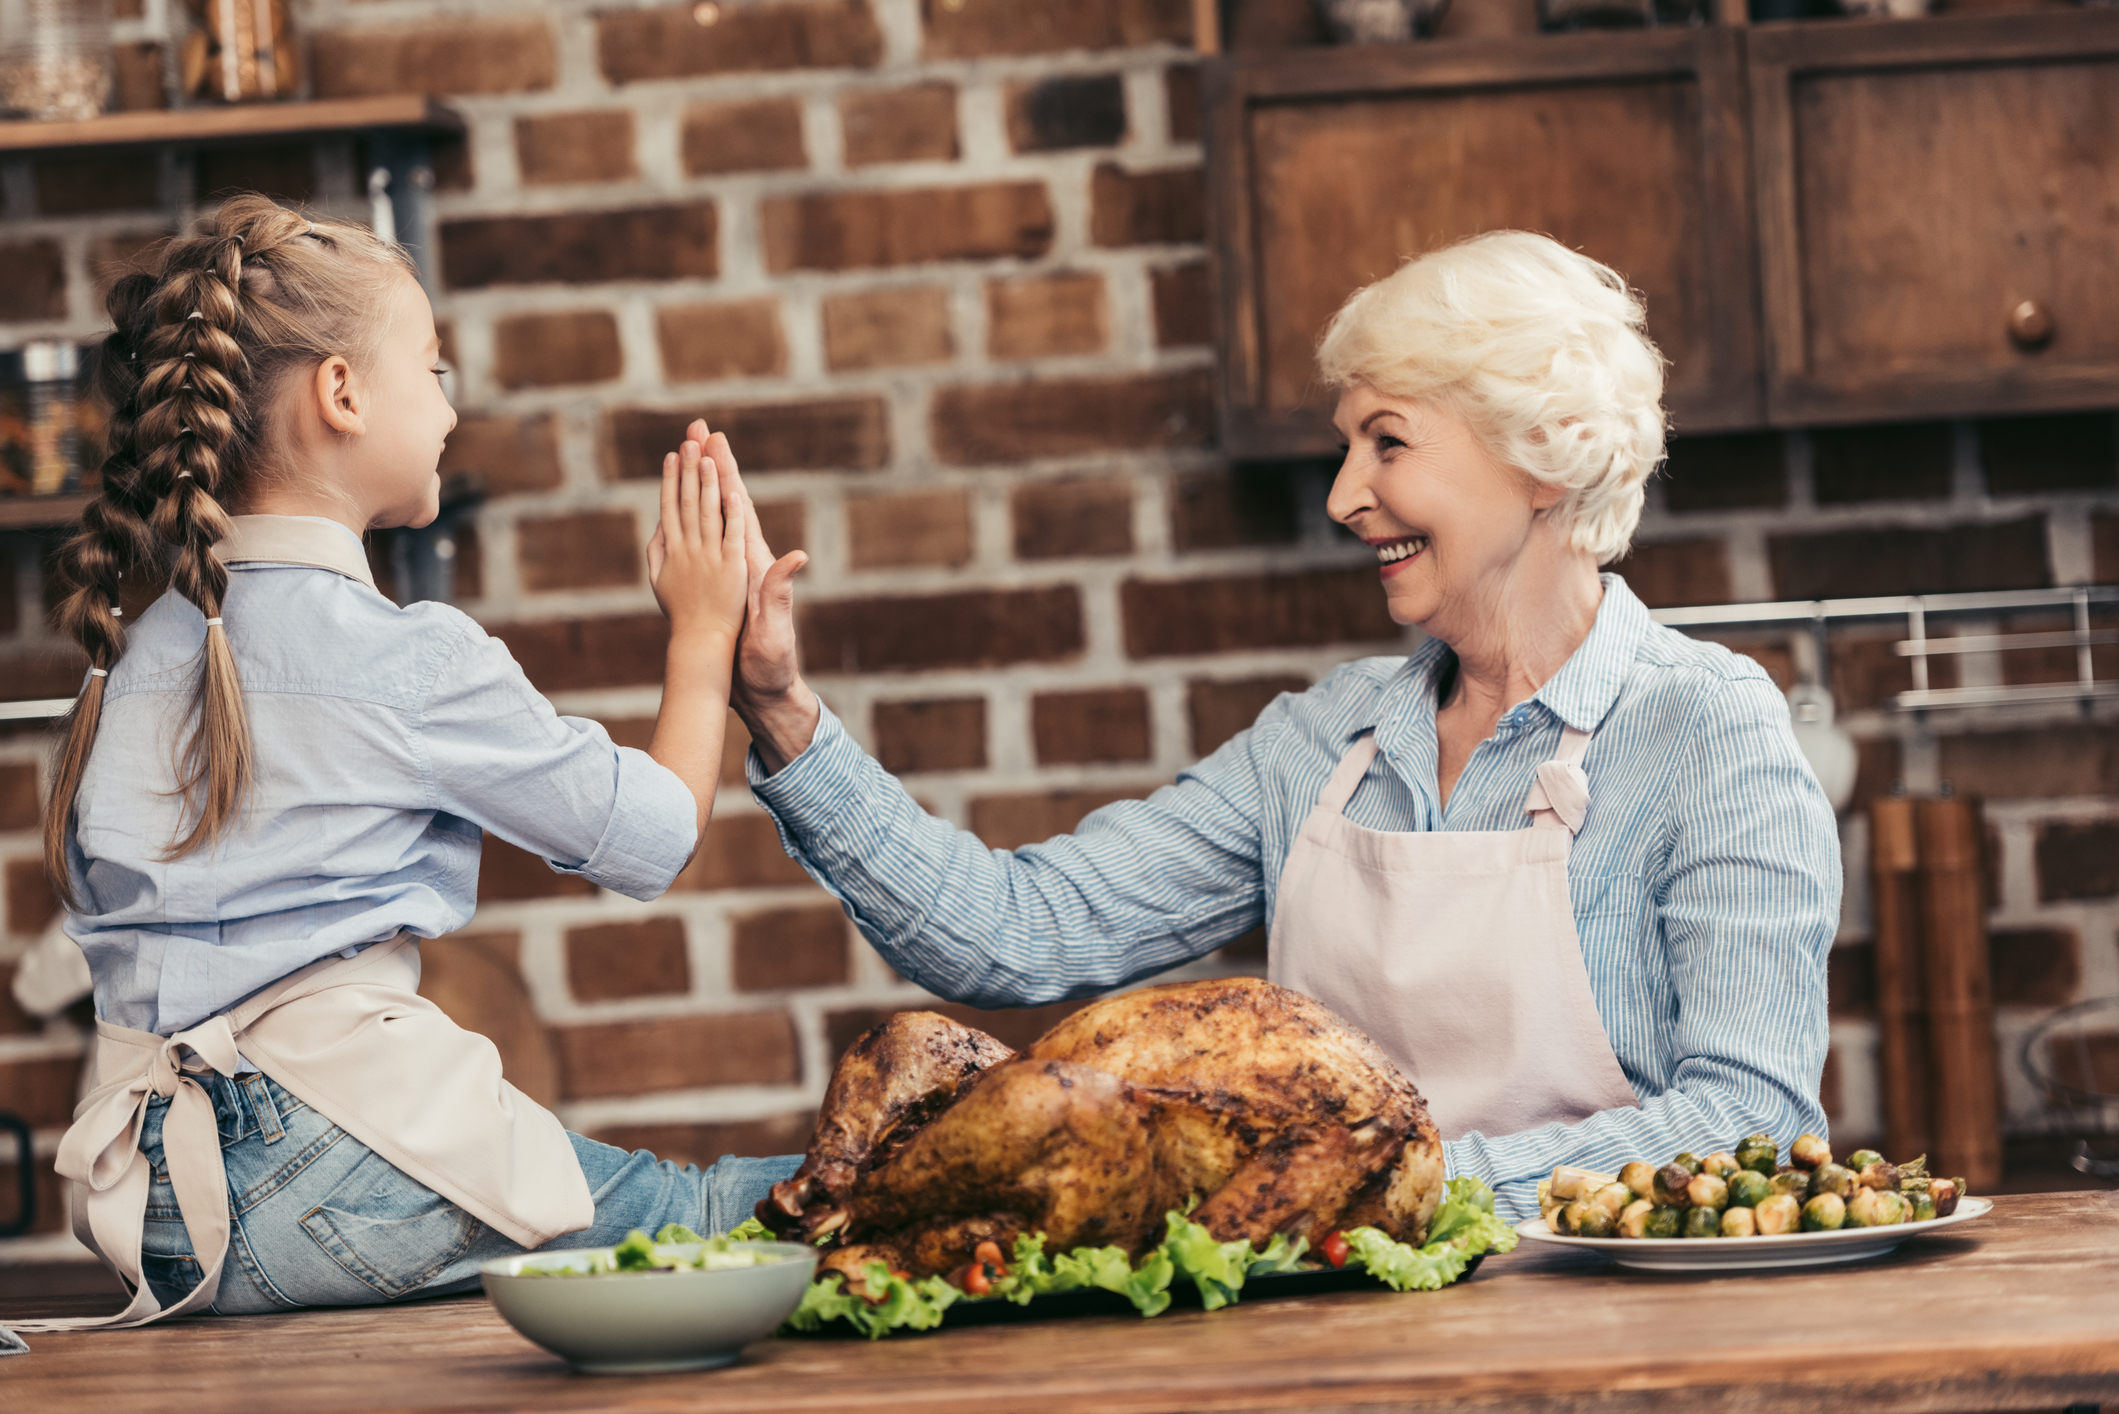 Kitchen Safety Tips for Thanksgiving Day